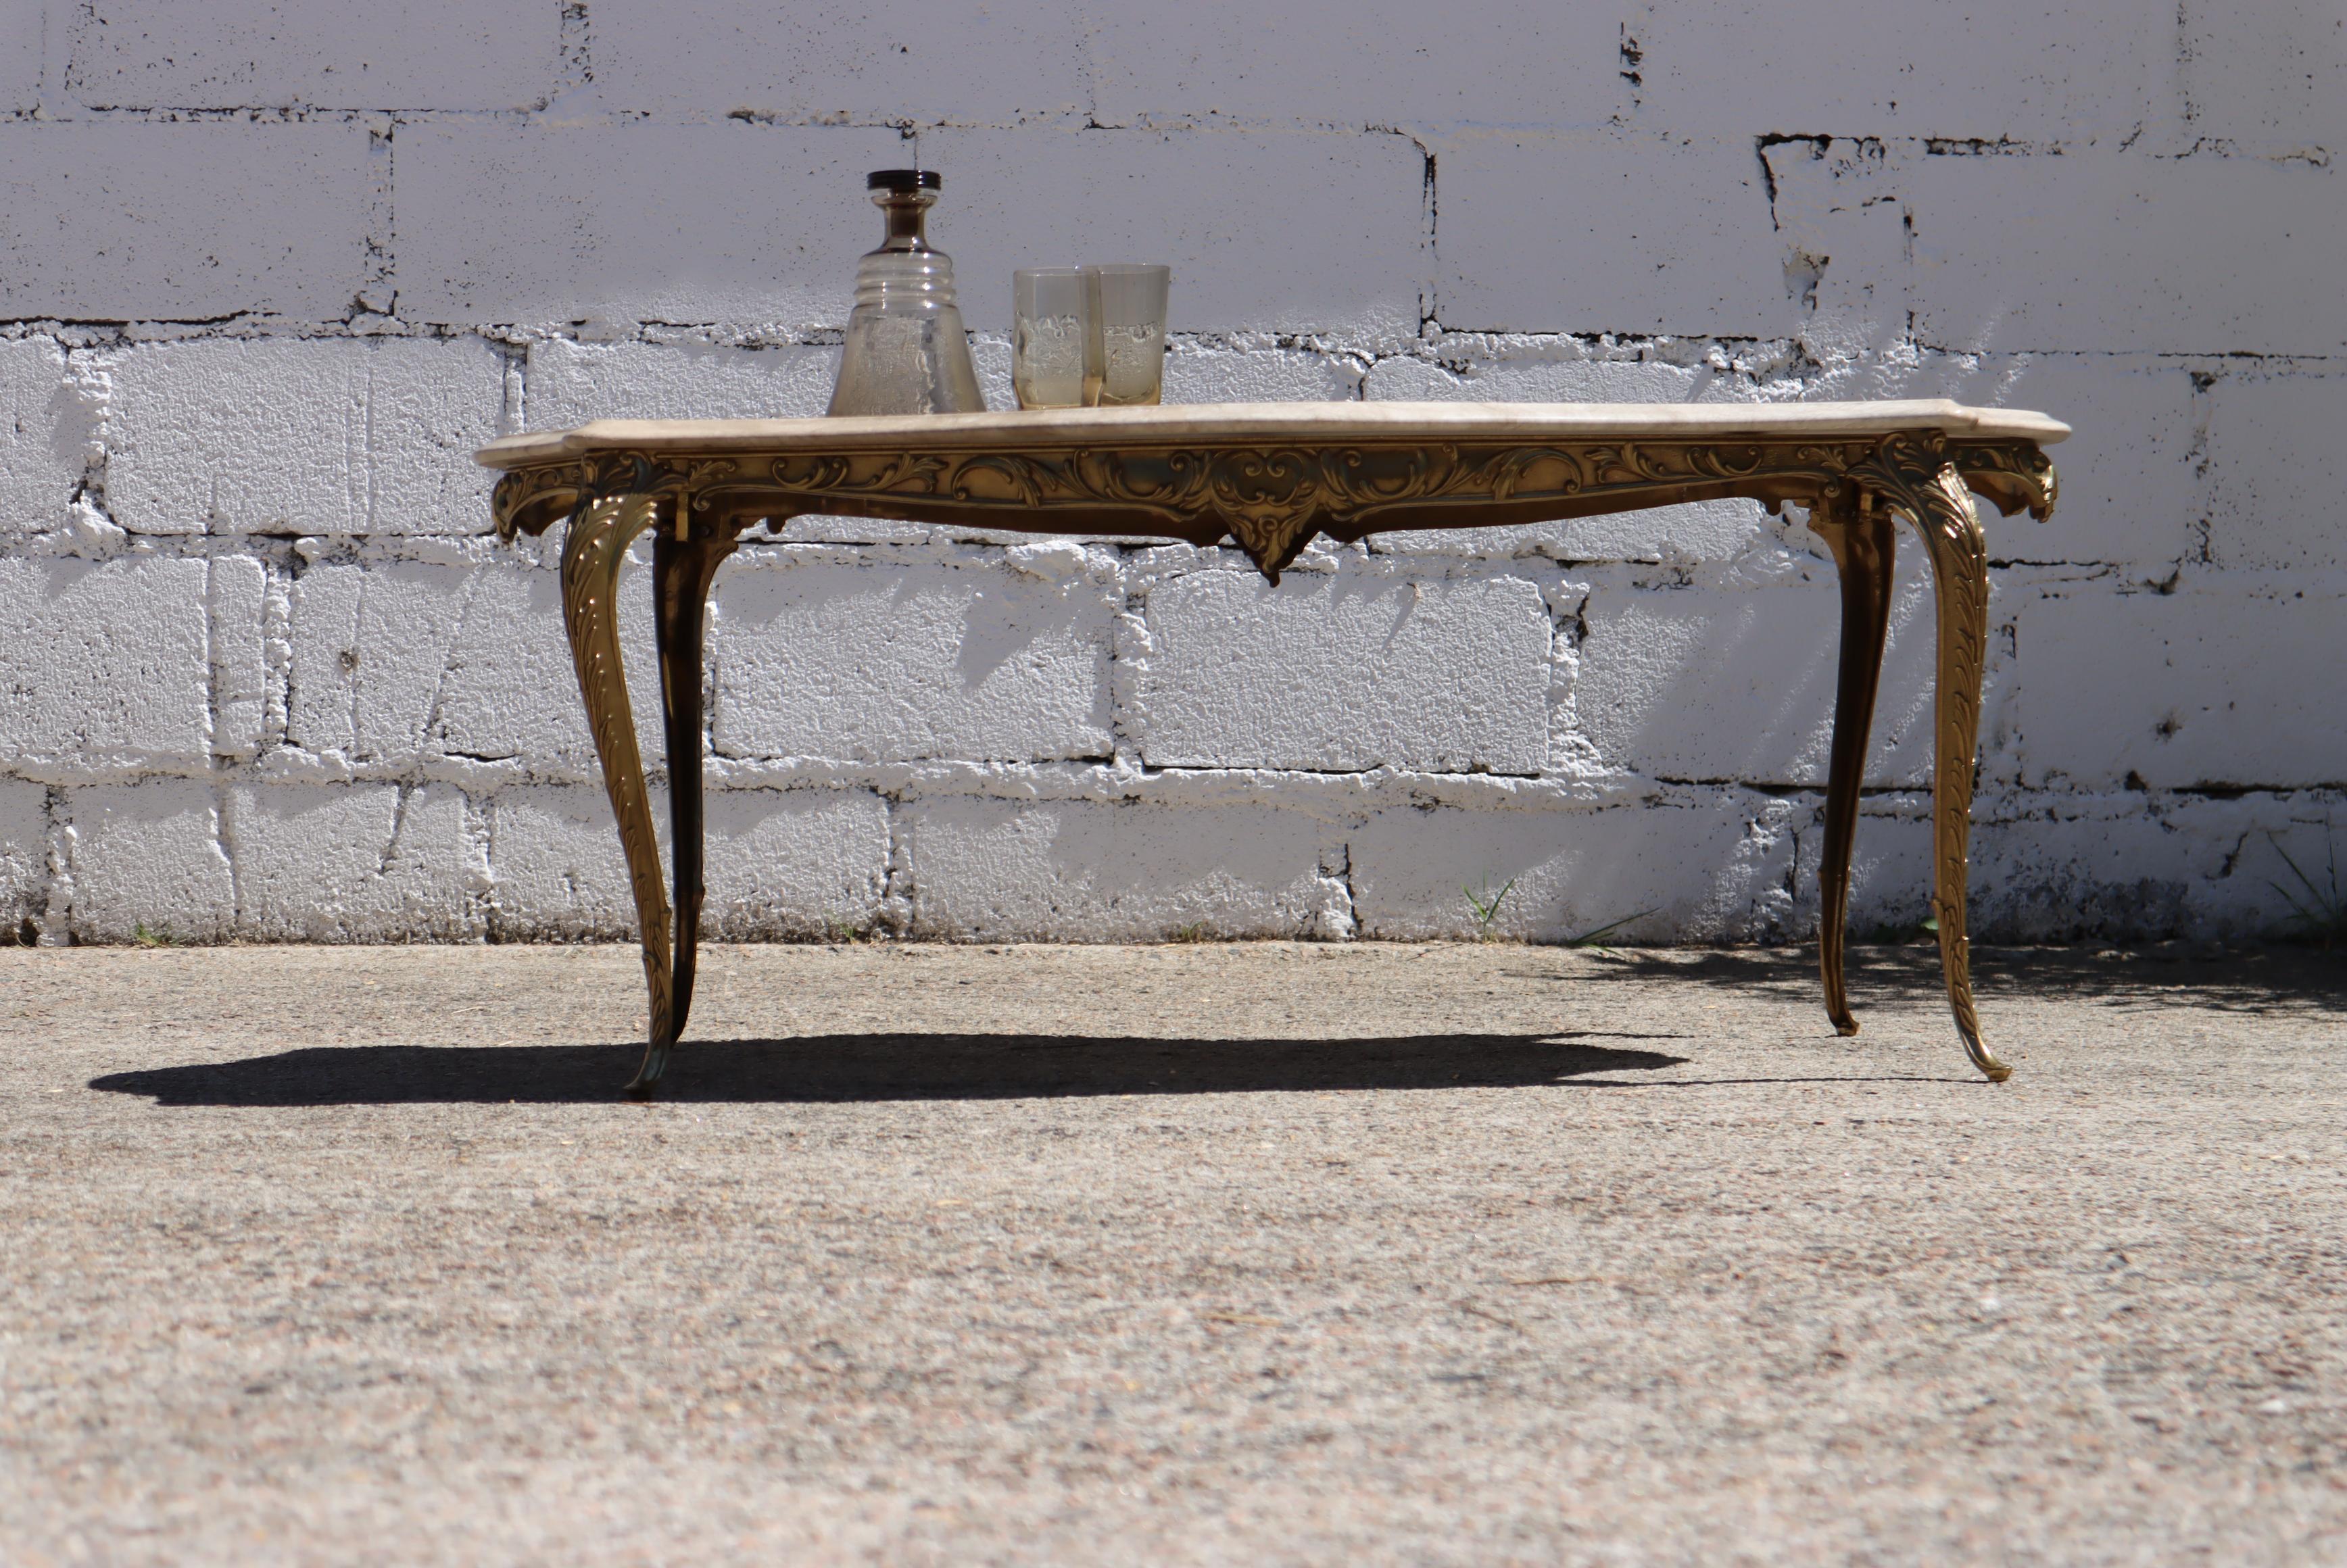 French Vintage big marble brass coffee table style Louis XV-vintage Lounge table-cocktail table from the 70s
Elegant tabletop shape - Marble Top with natural Patterns in beautiful mix of different shades of grey, cream beige and a hint of